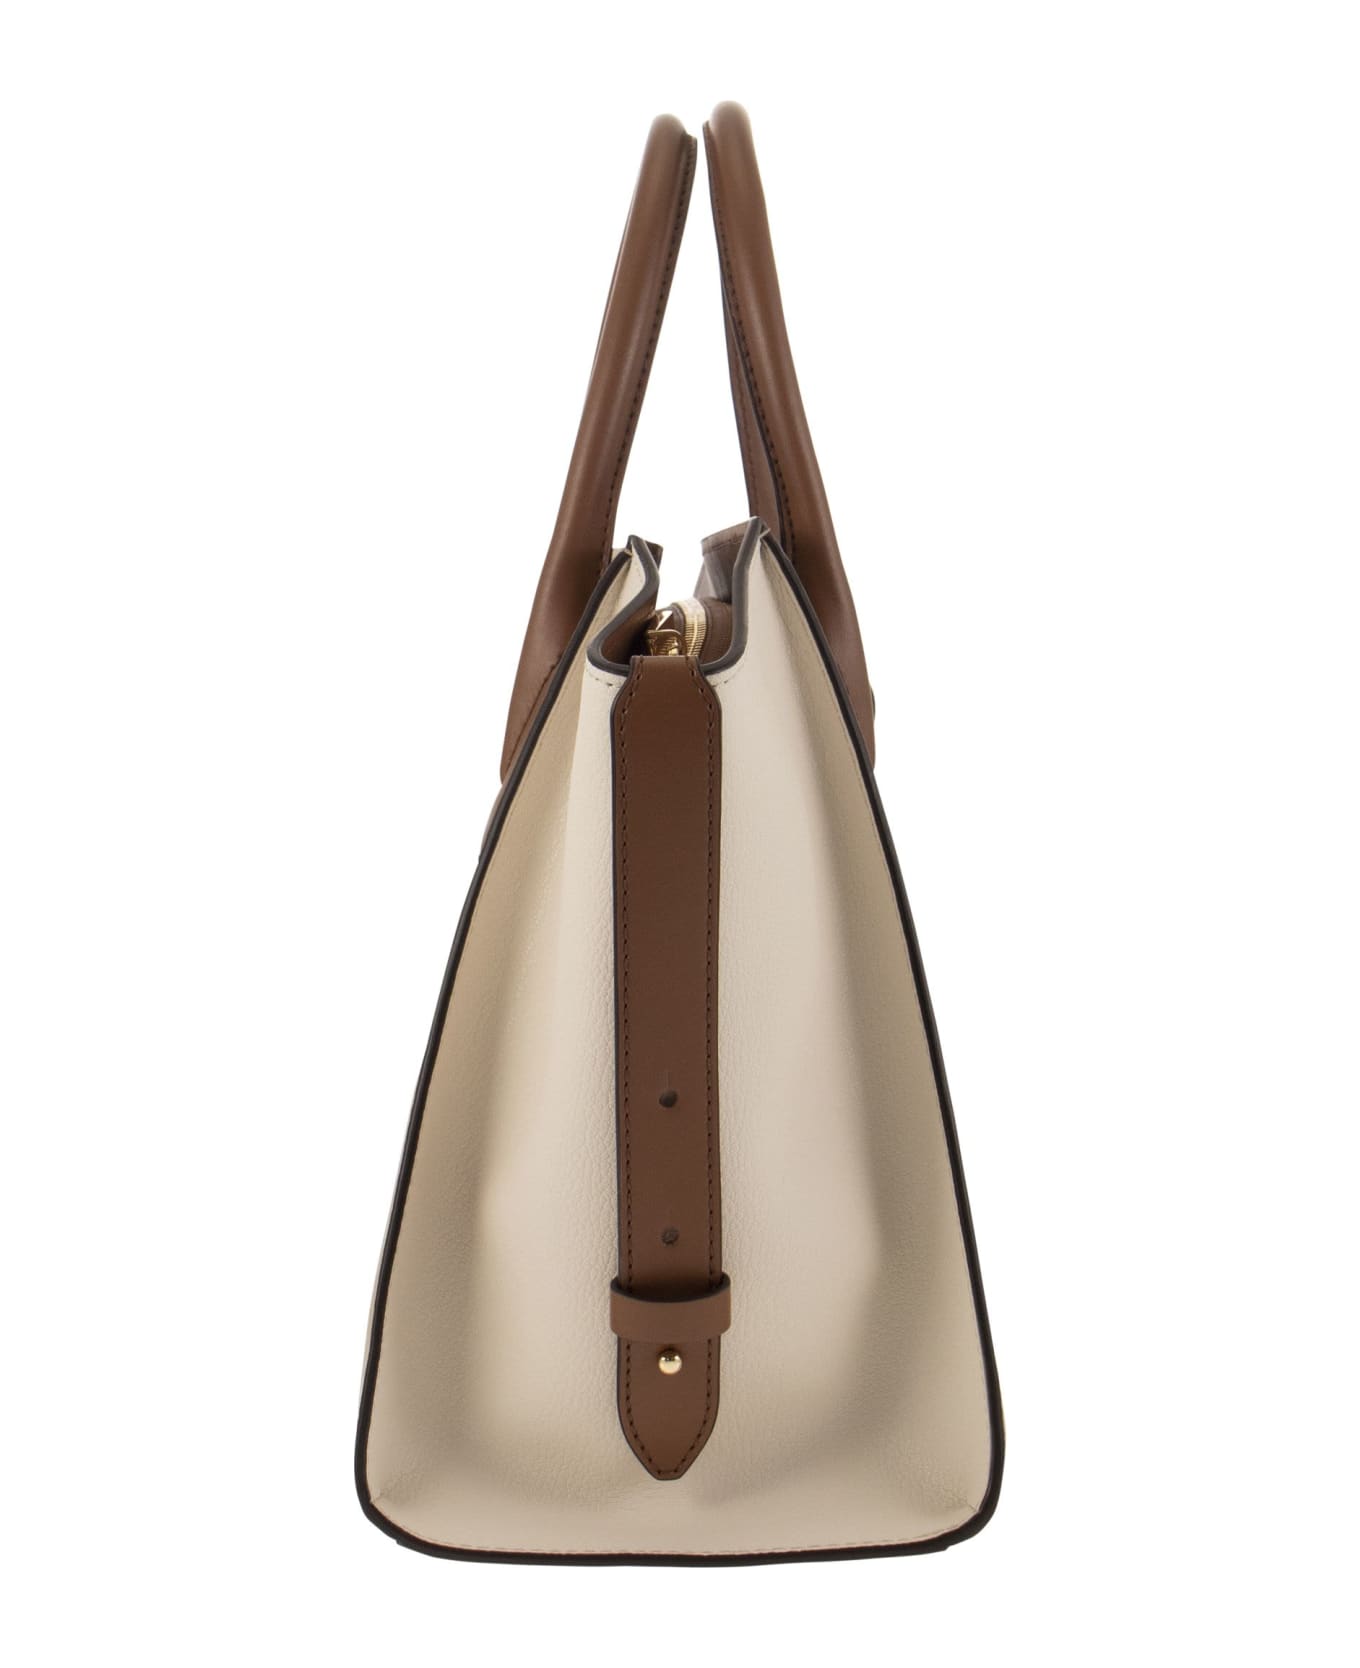 Michael Kors Avril - Colour-block Grained Leather Handbag With Zip - Camel/ivory トートバッグ